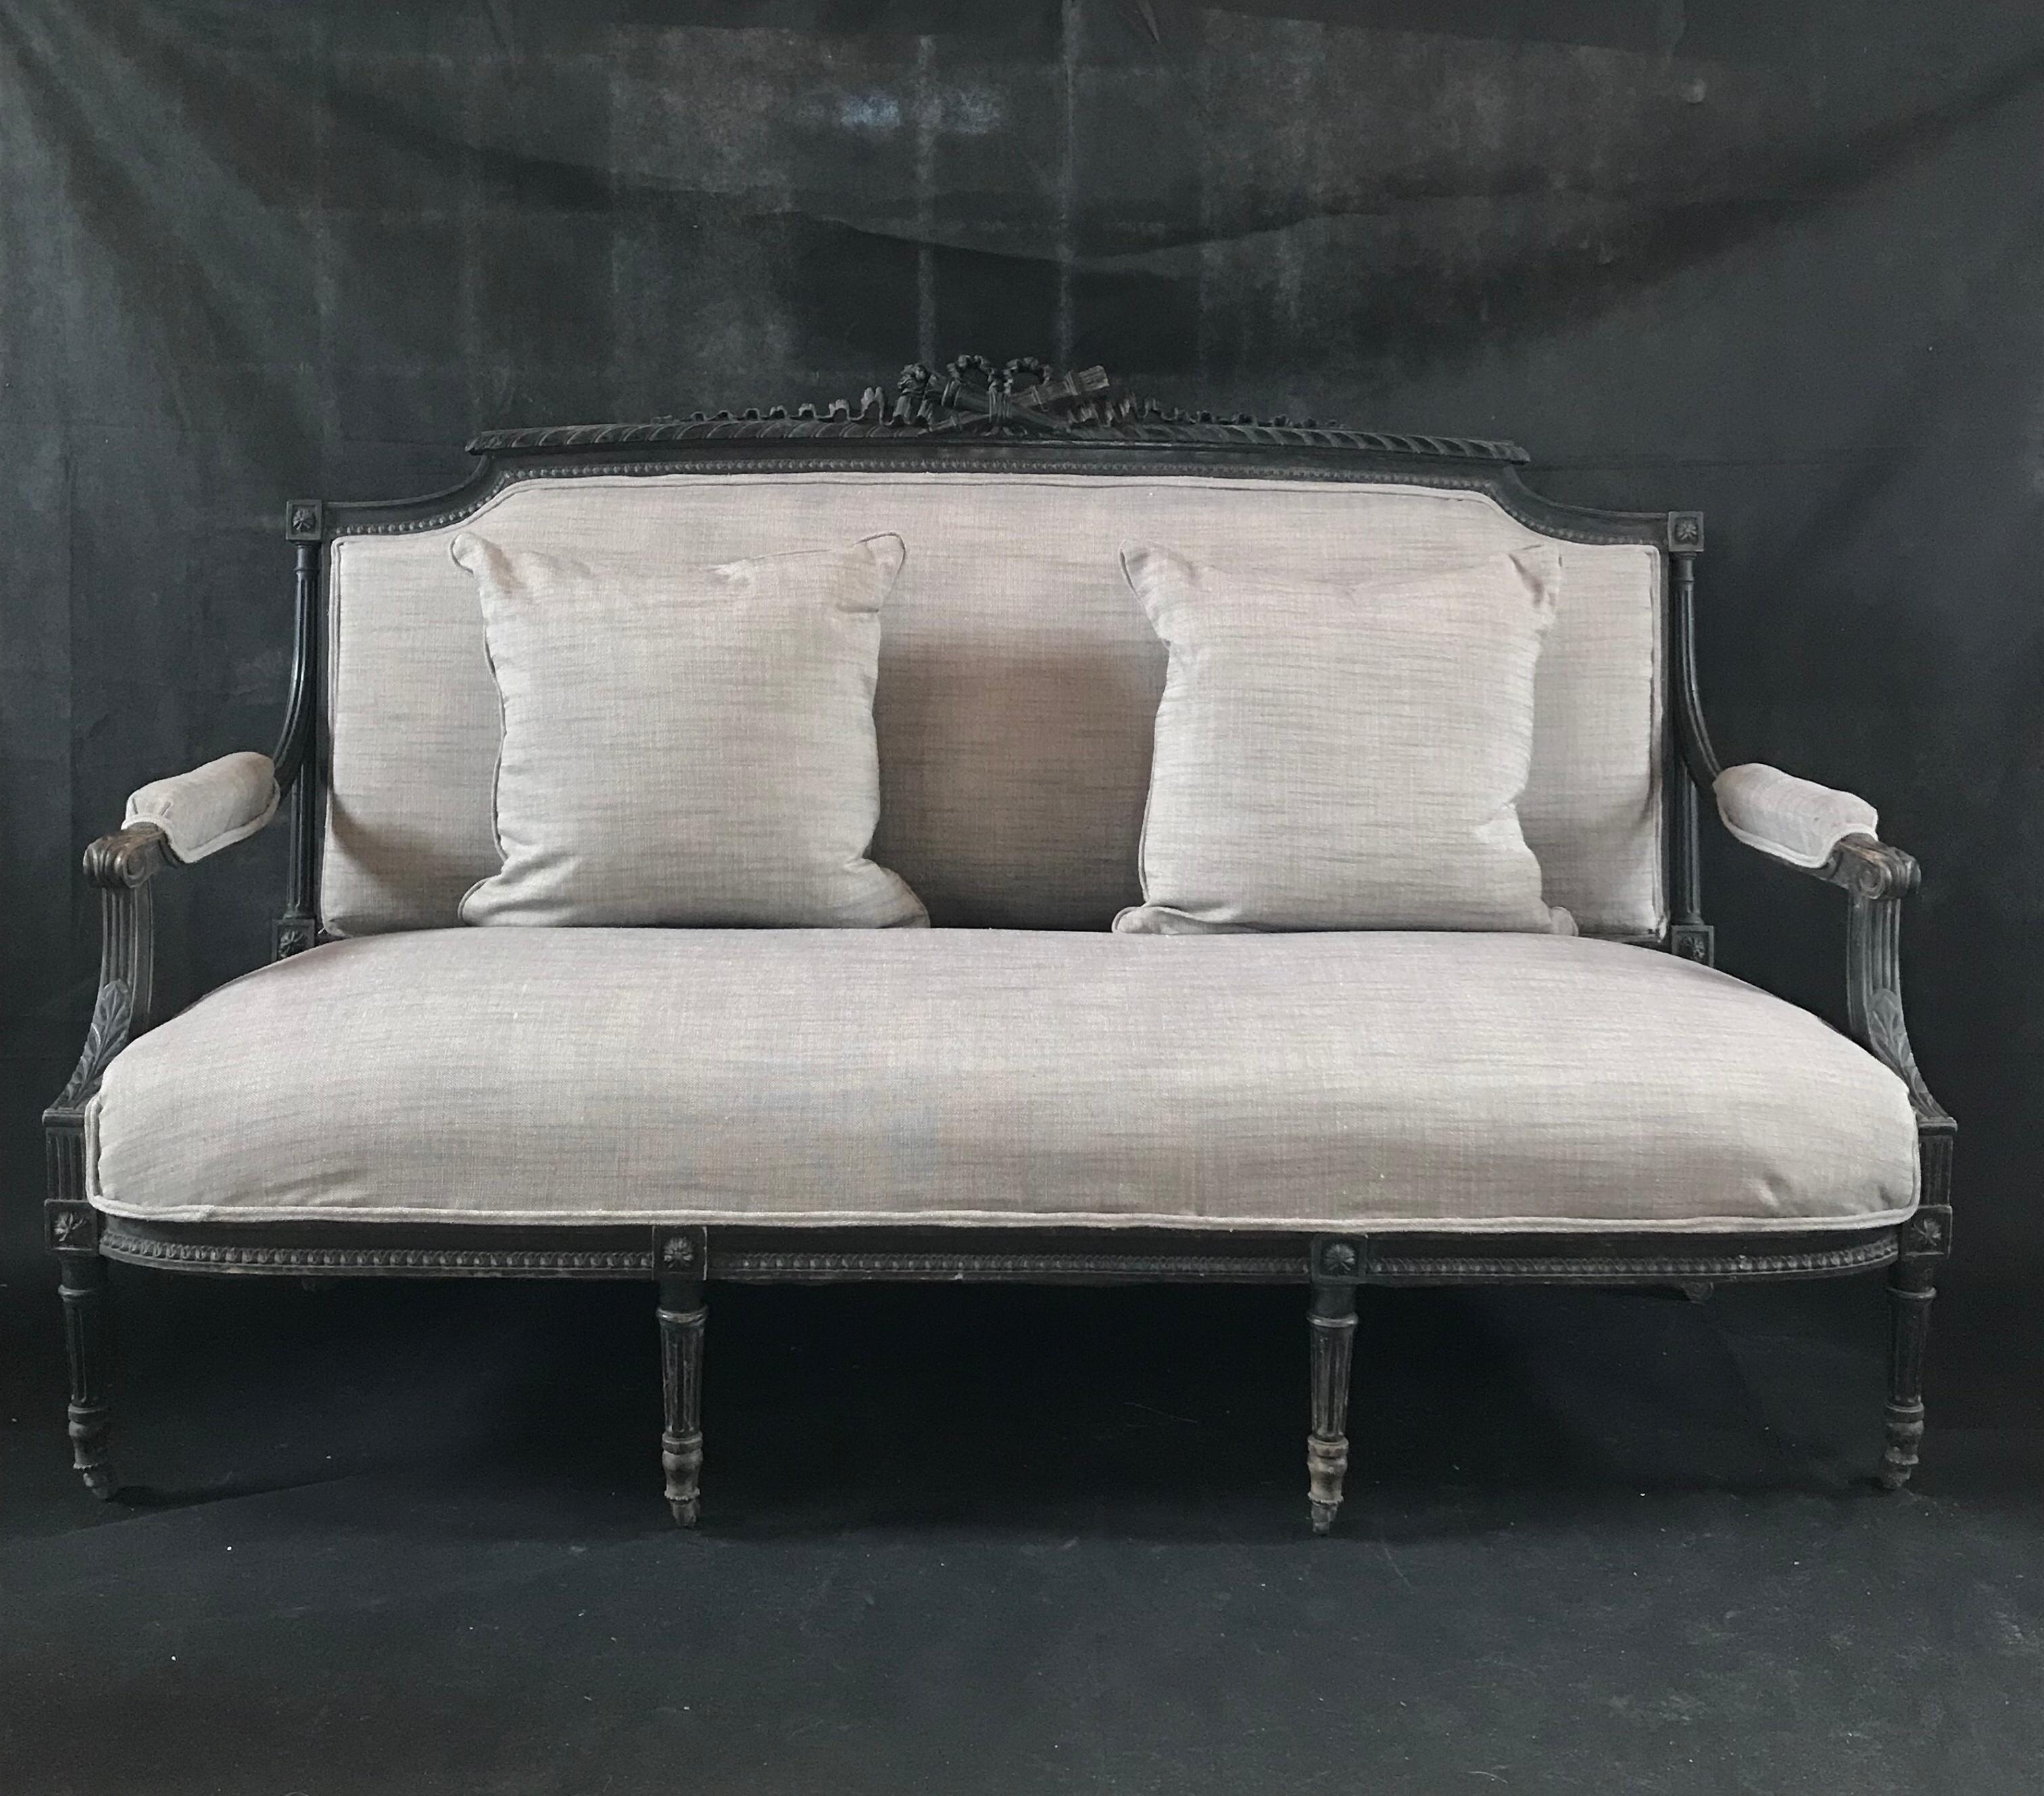 A gorgeous 19th century sofa bought in Avignon France having stunning carvings, original wood casters, and all new cotton/linen upholstery including two pillows.
Measures: Seat height 21.